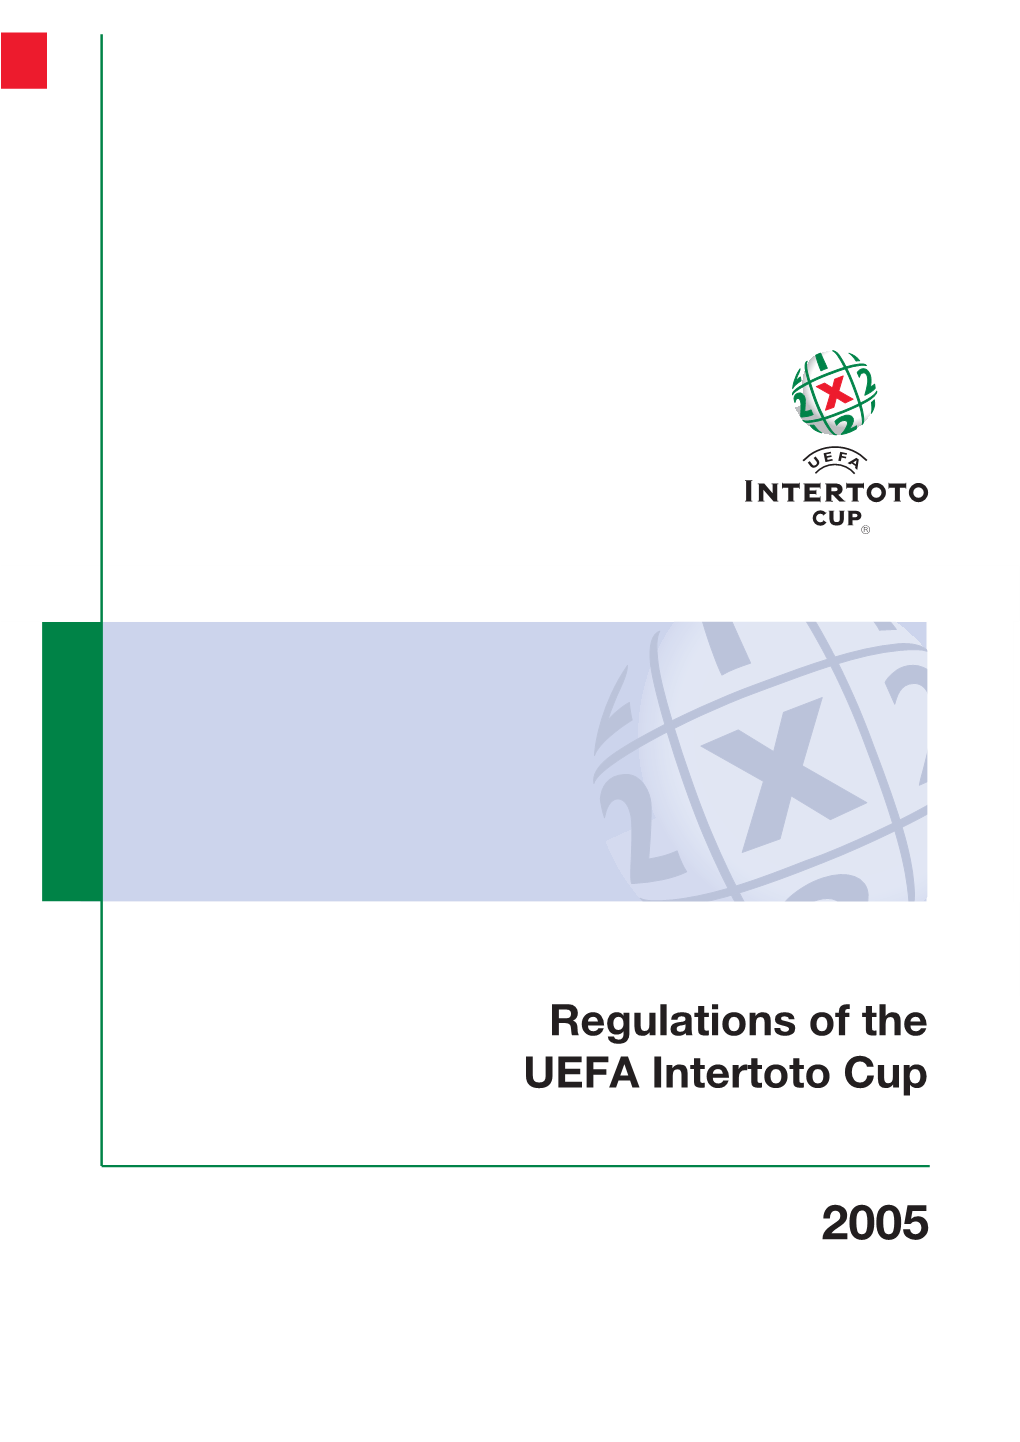 Regulations of the UEFA Intertoto Cup